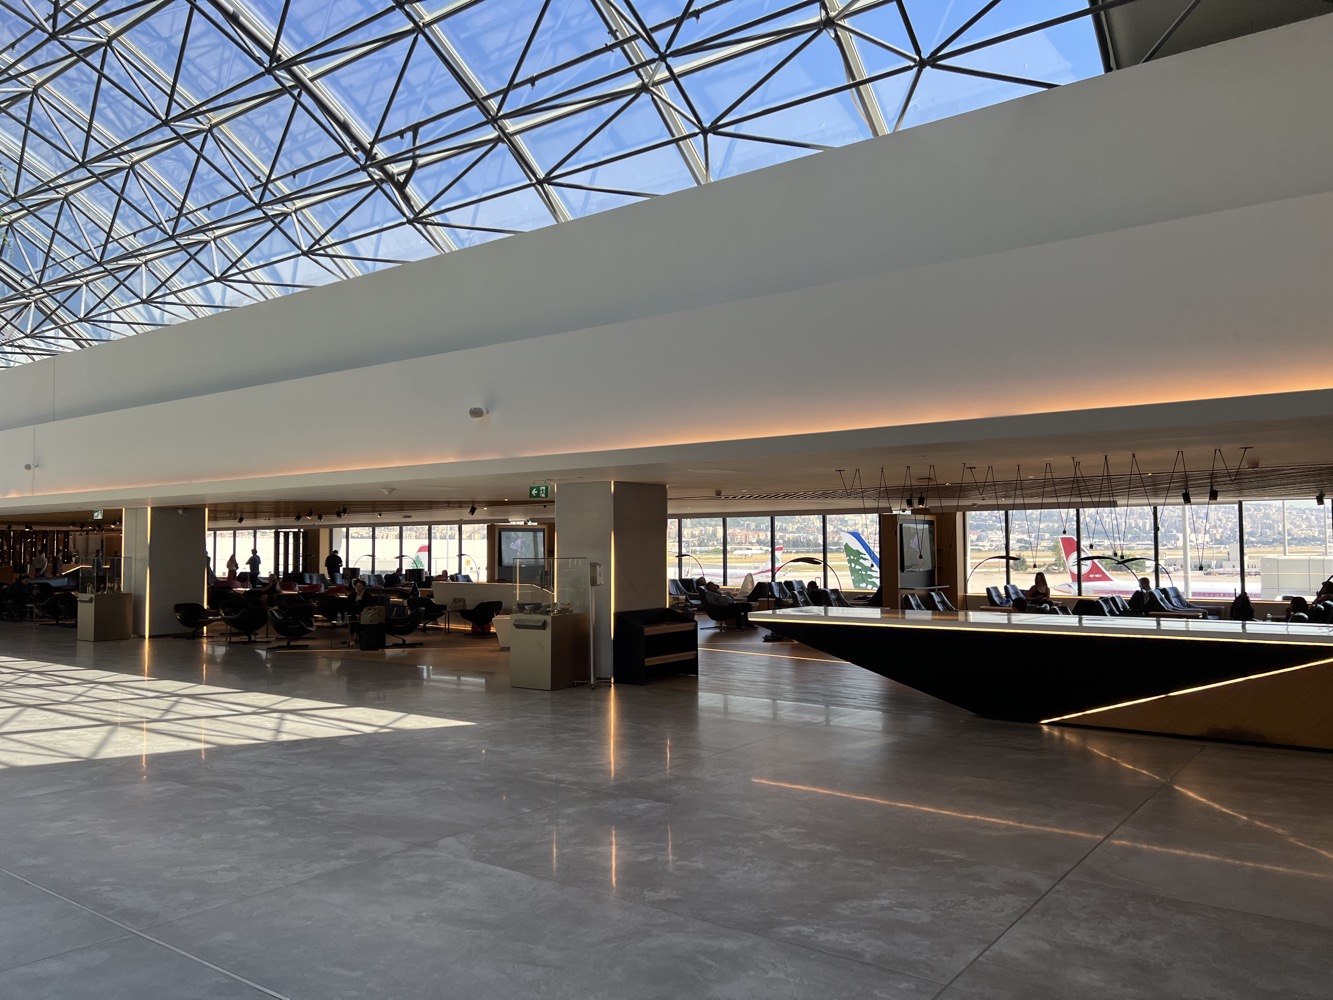 an airport lounge with a large glass ceiling